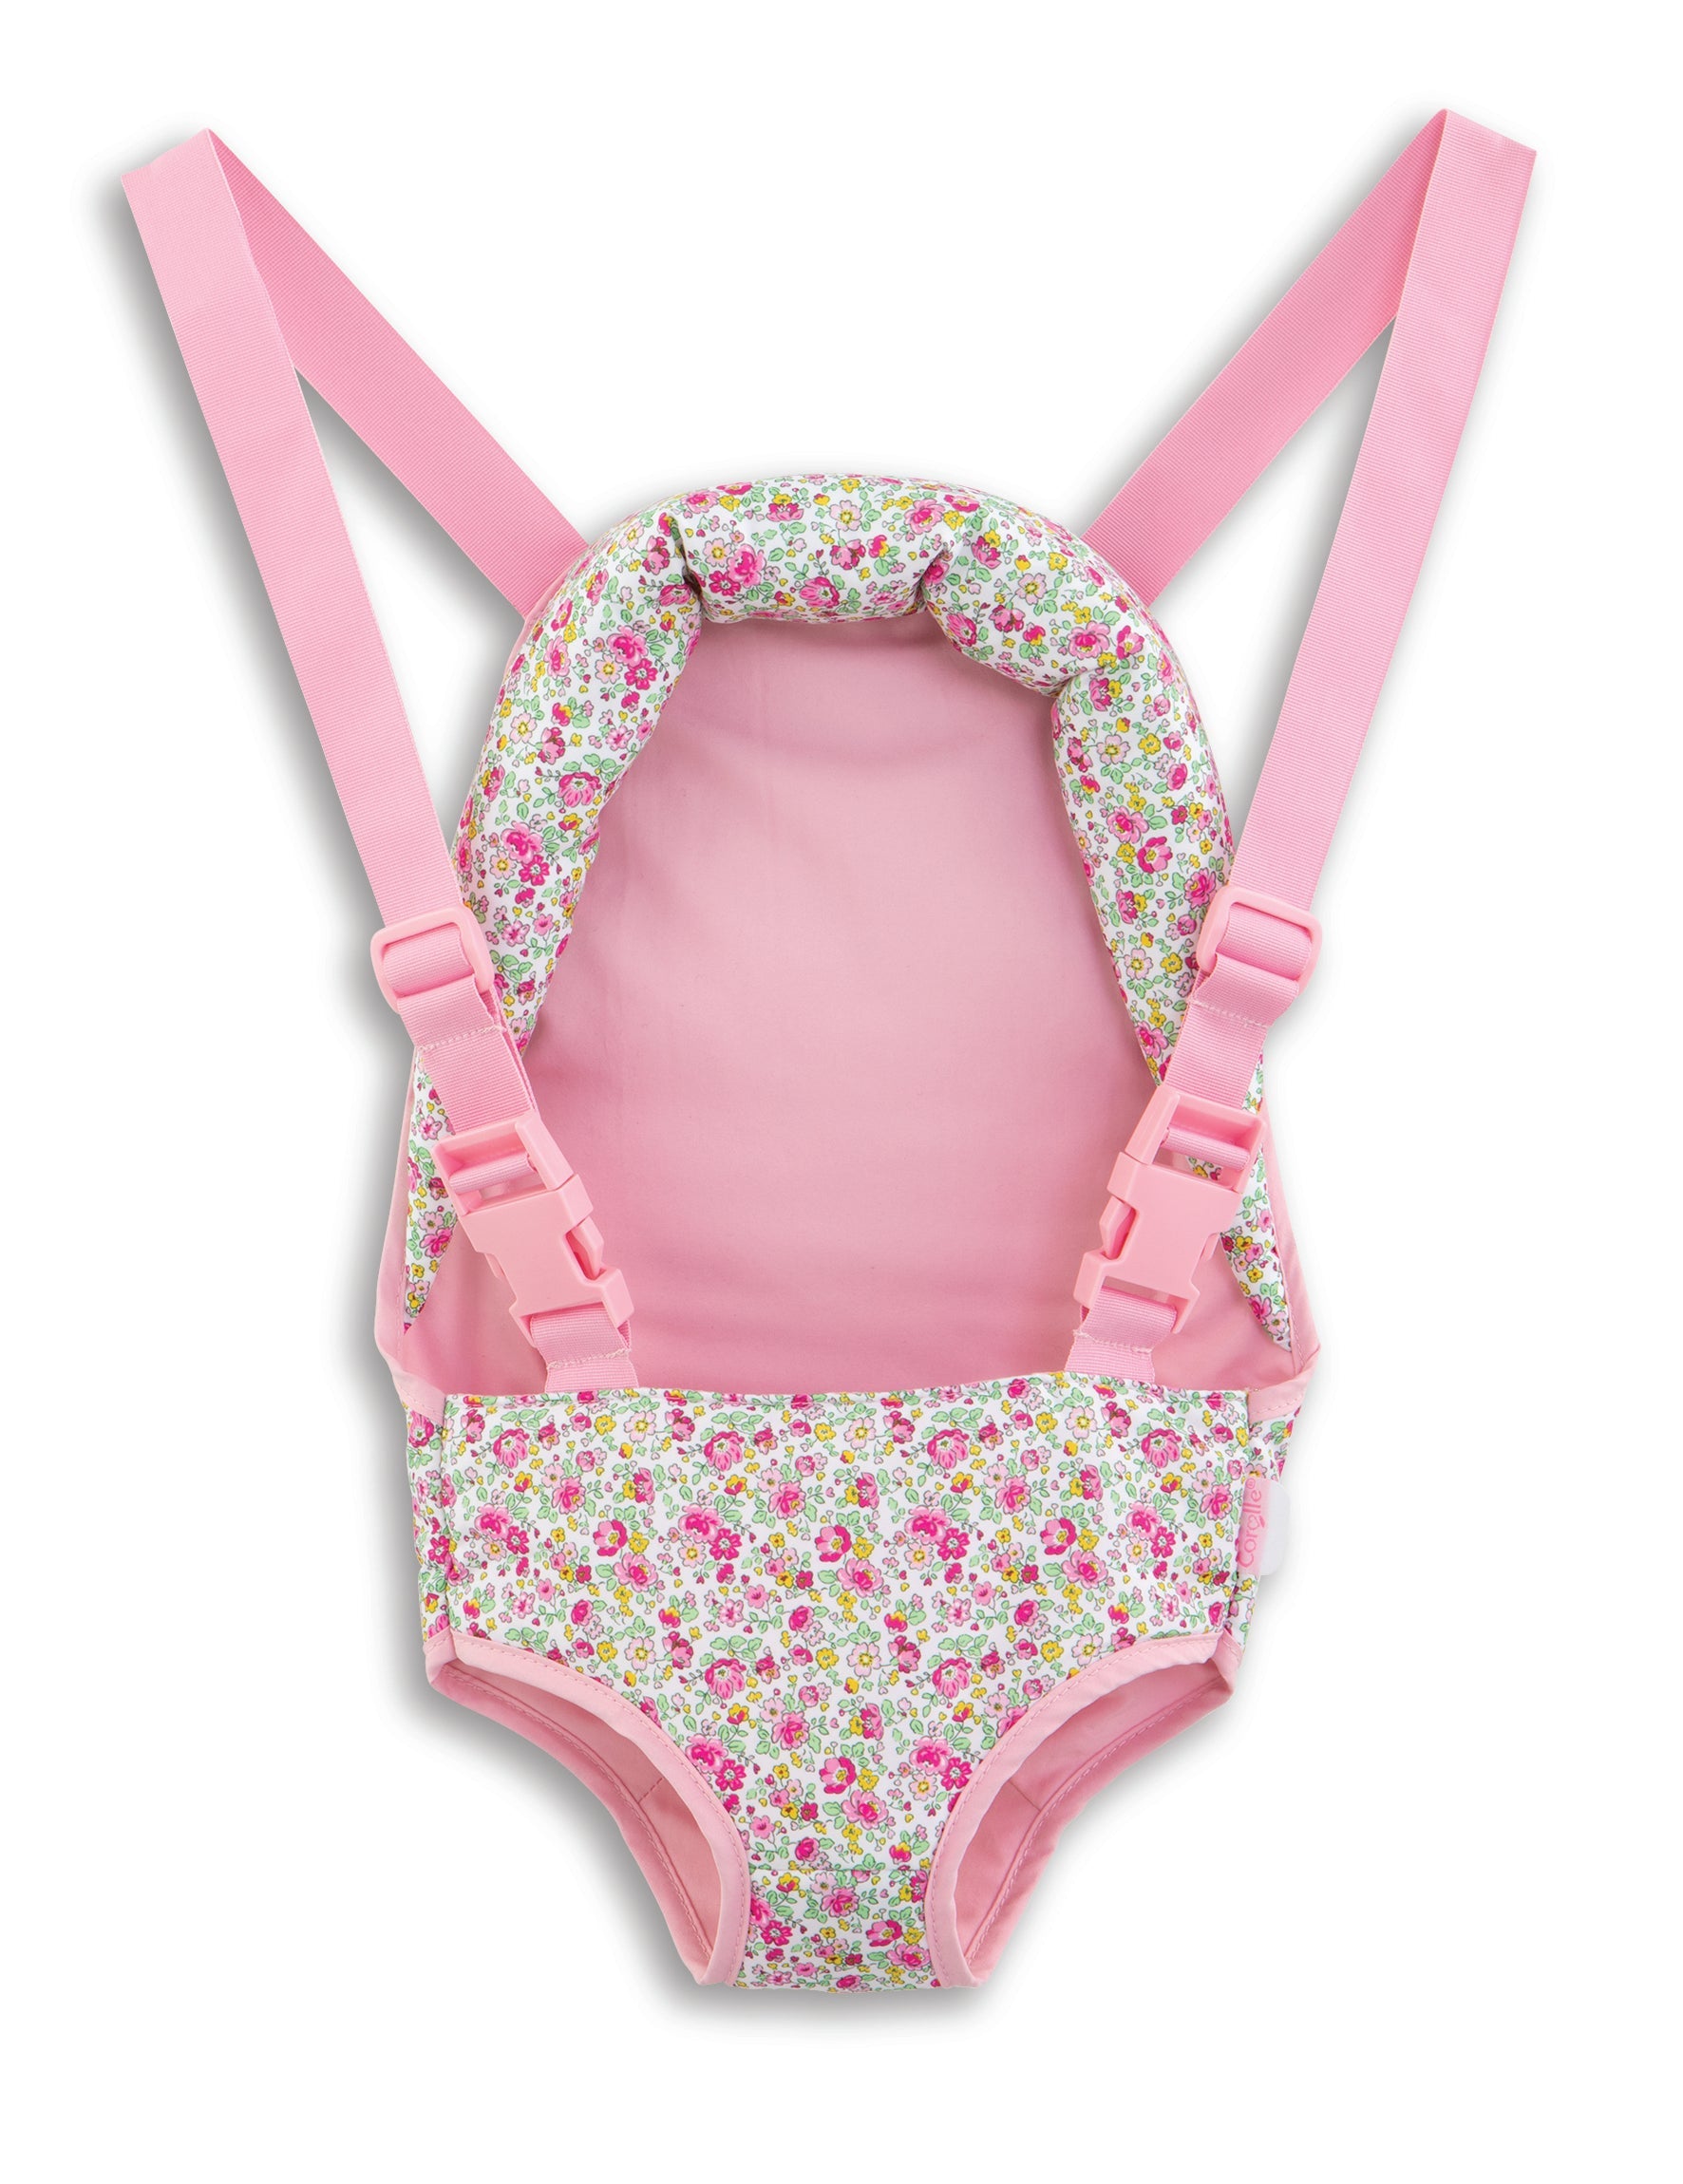 Corolle-Floral Baby Doll Sling For 14